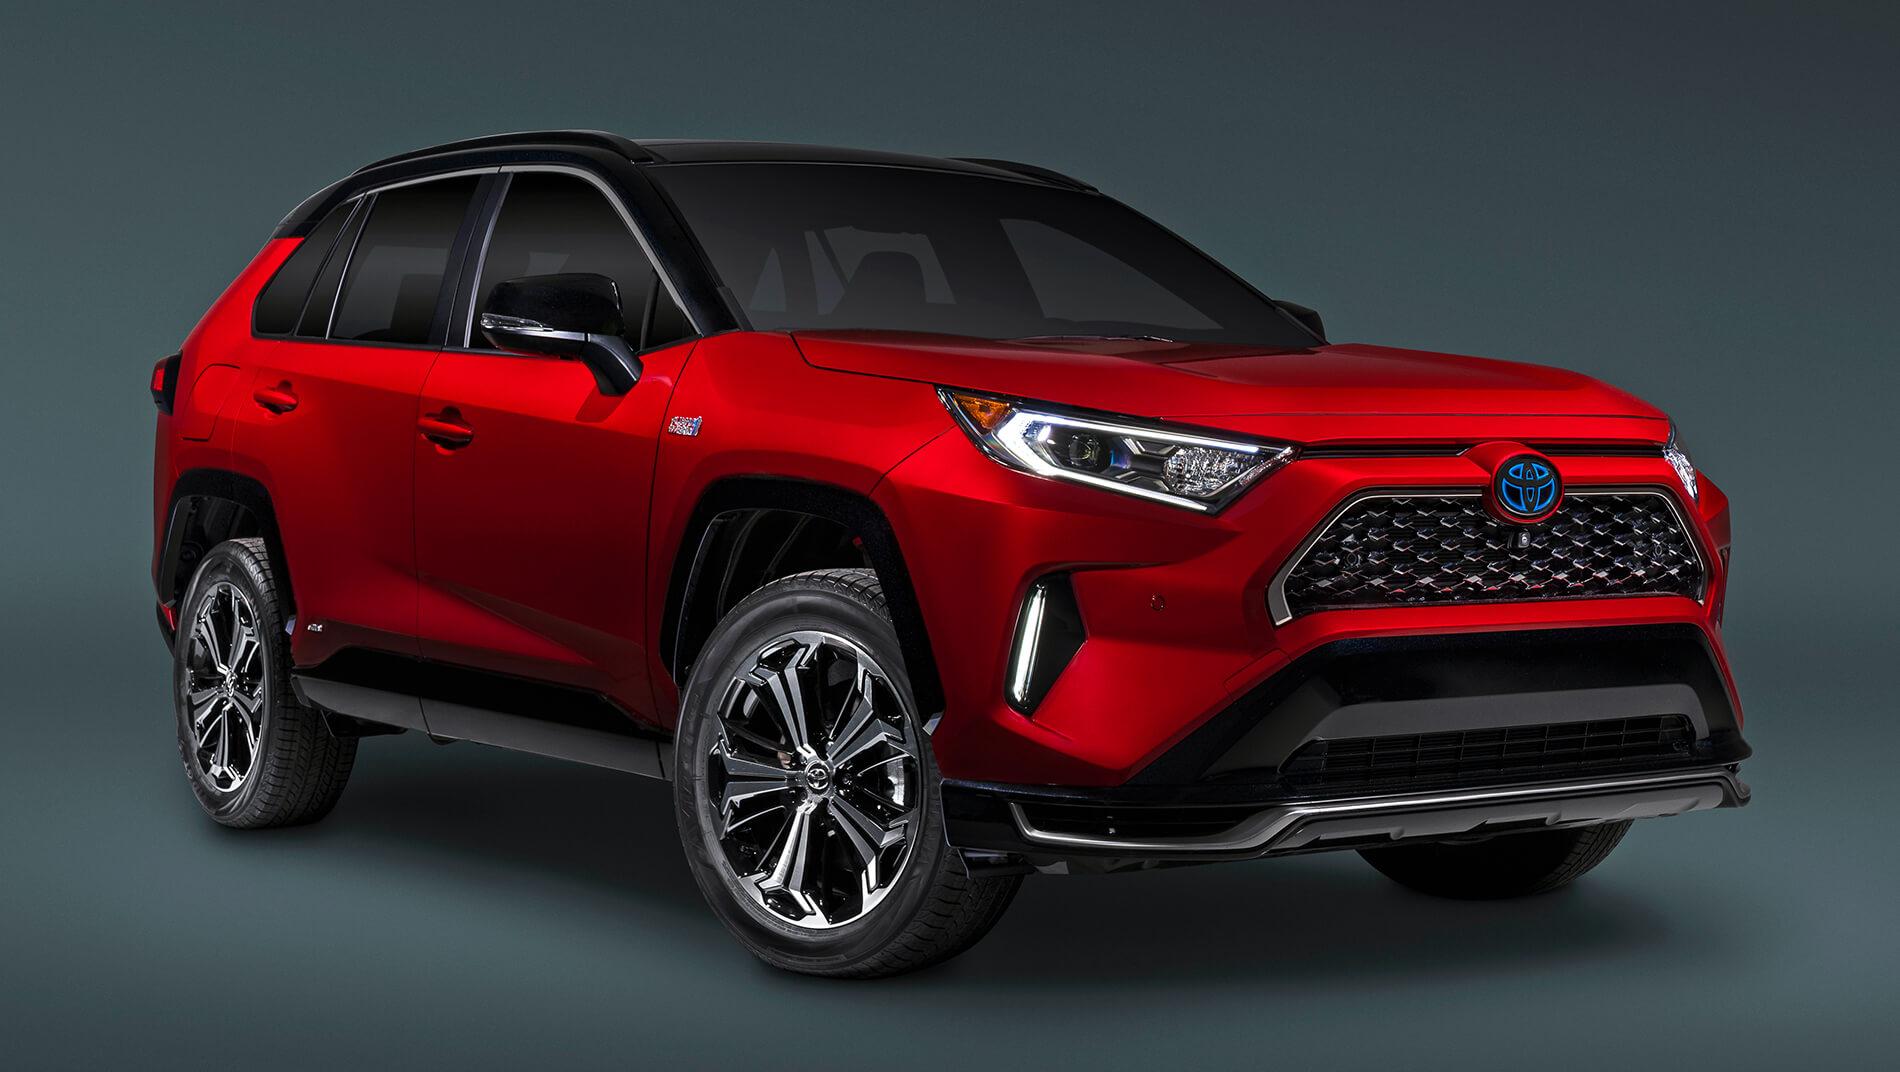 exterior image of a red Toyota RAV4 prime plug in electric hybrid